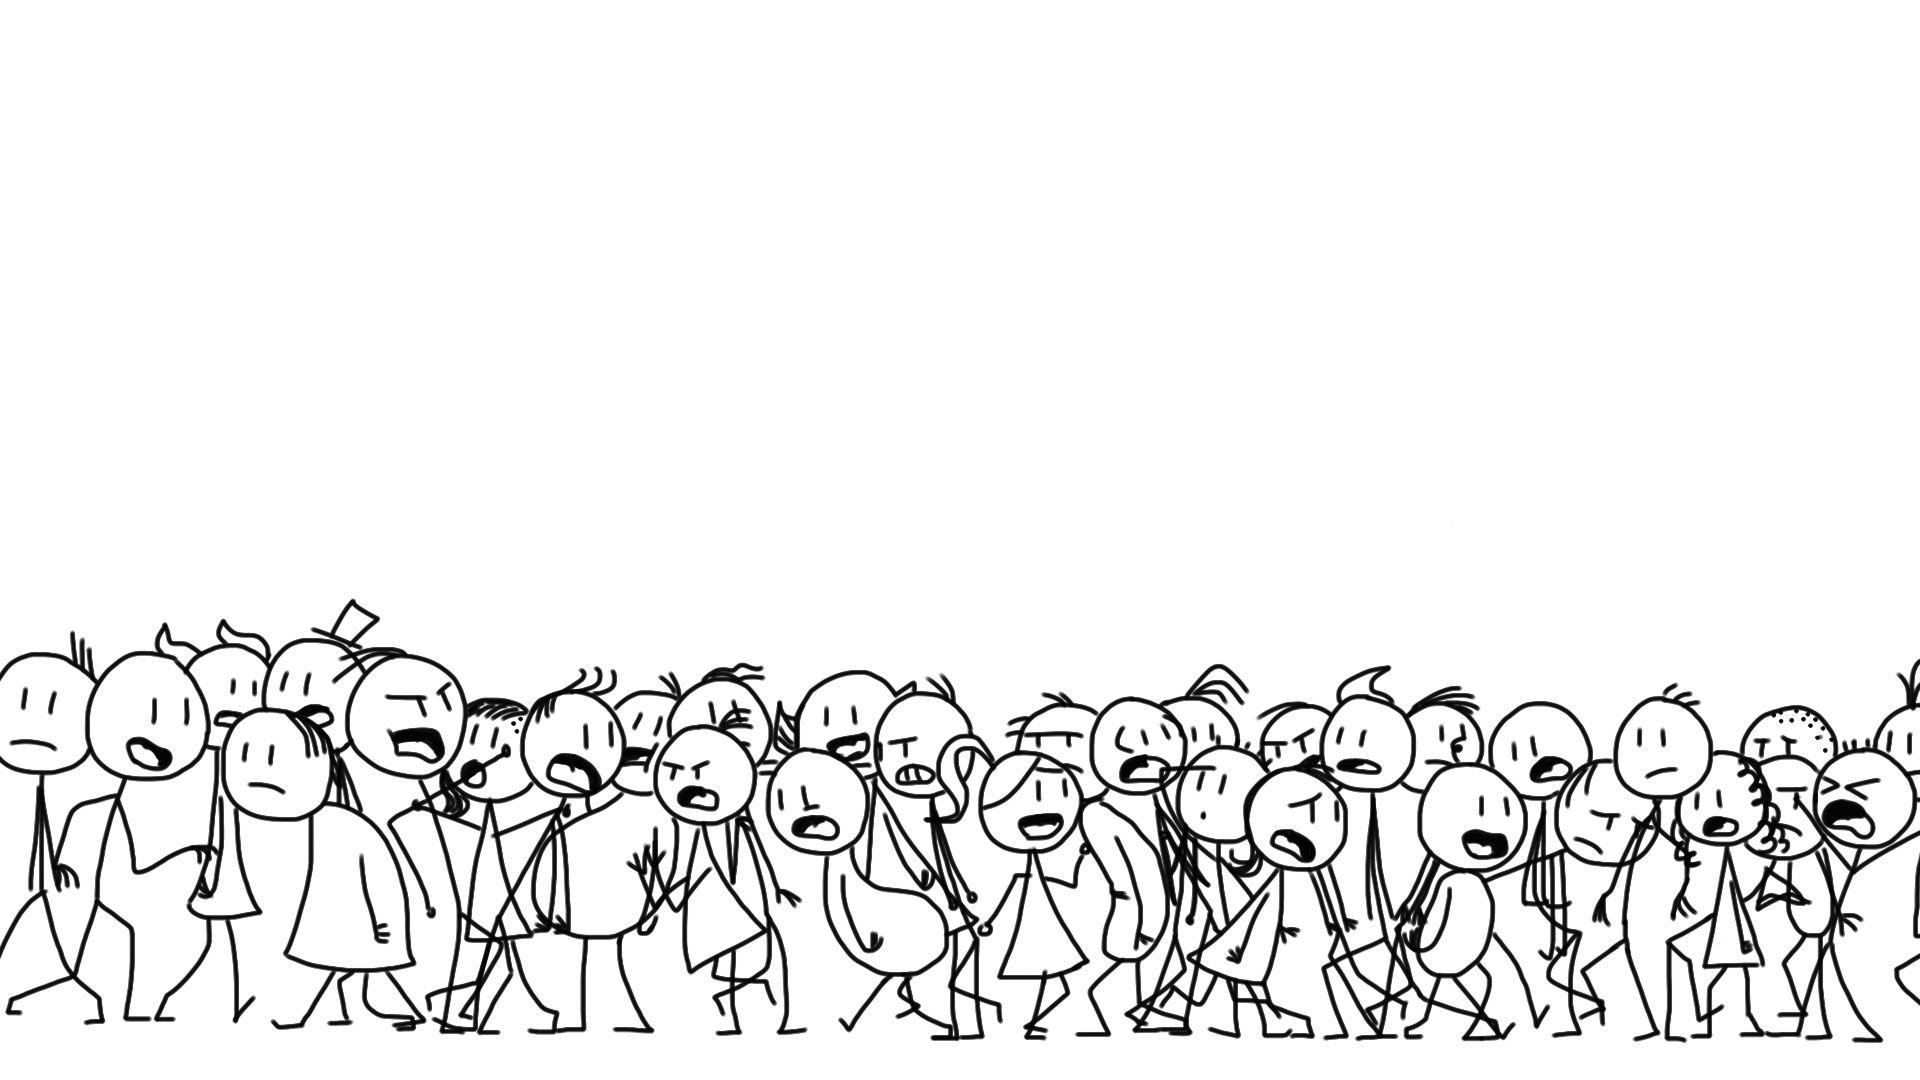 Stickman Crowd for apple download free